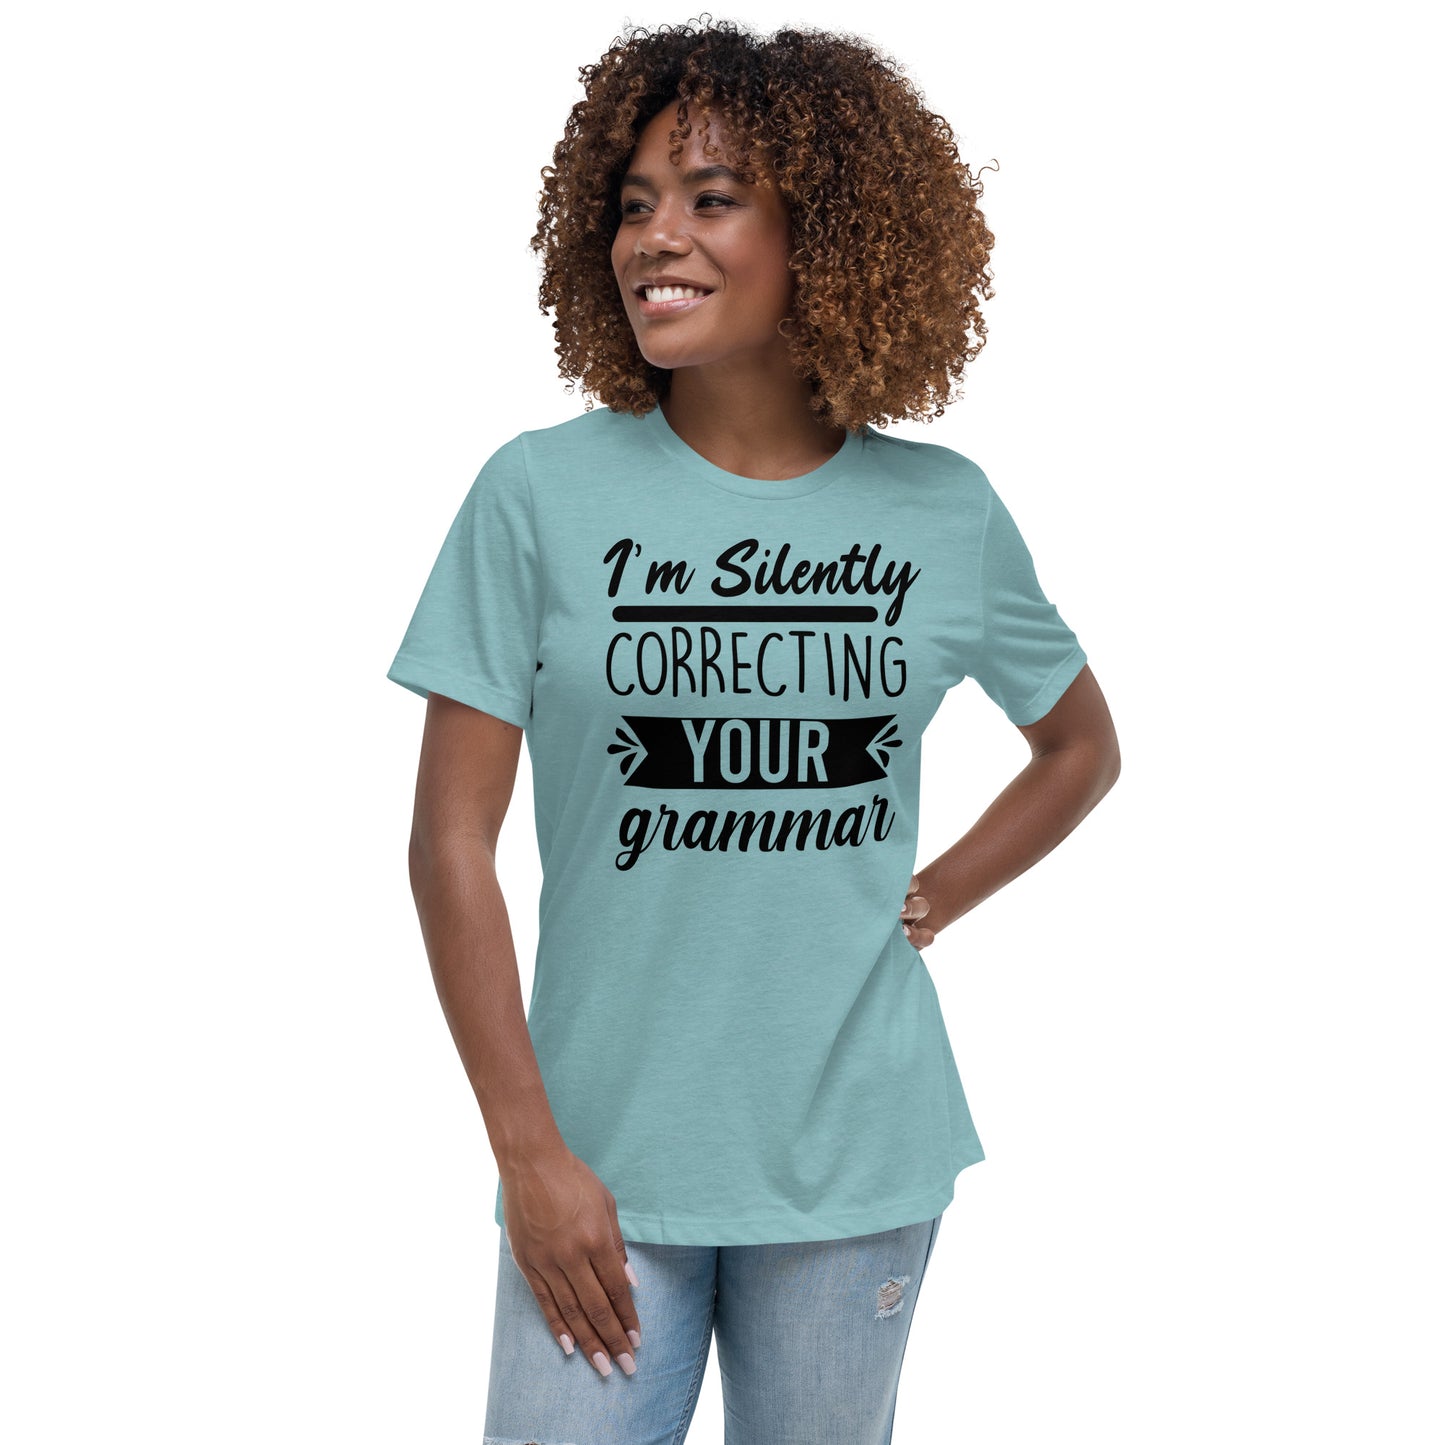 I'm Silently Correcting Your Grammar Women's Relaxed T-Shirt